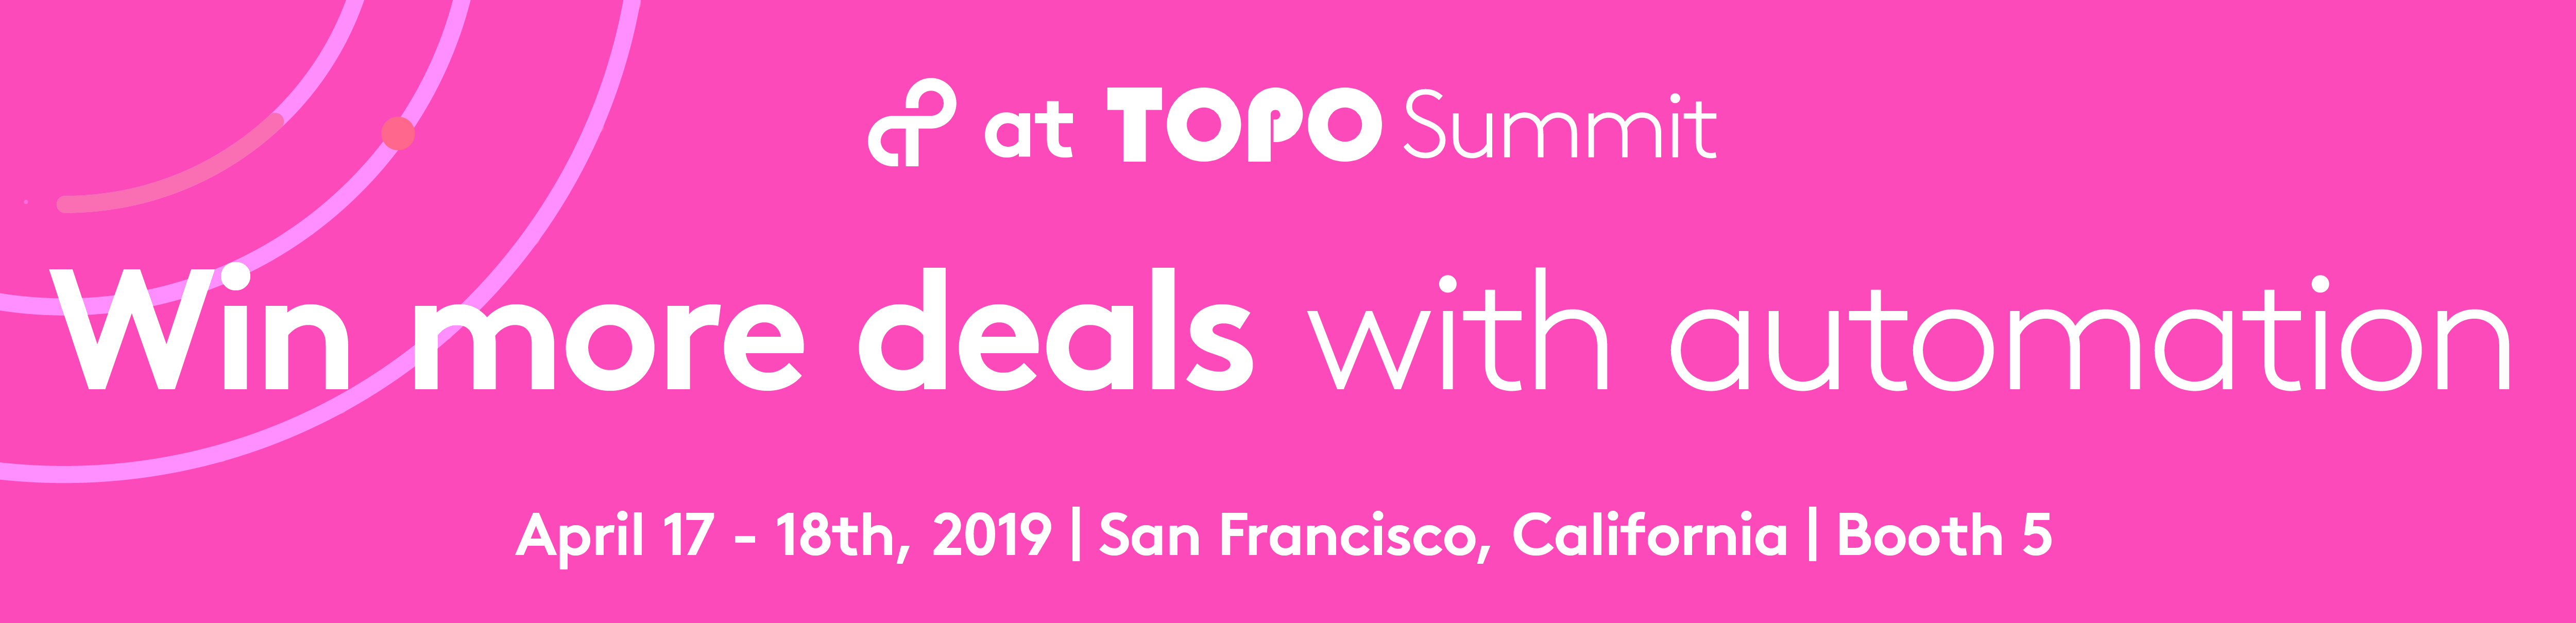 Tackling the toughest sales and revenue challenges at TOPO Summit 2019